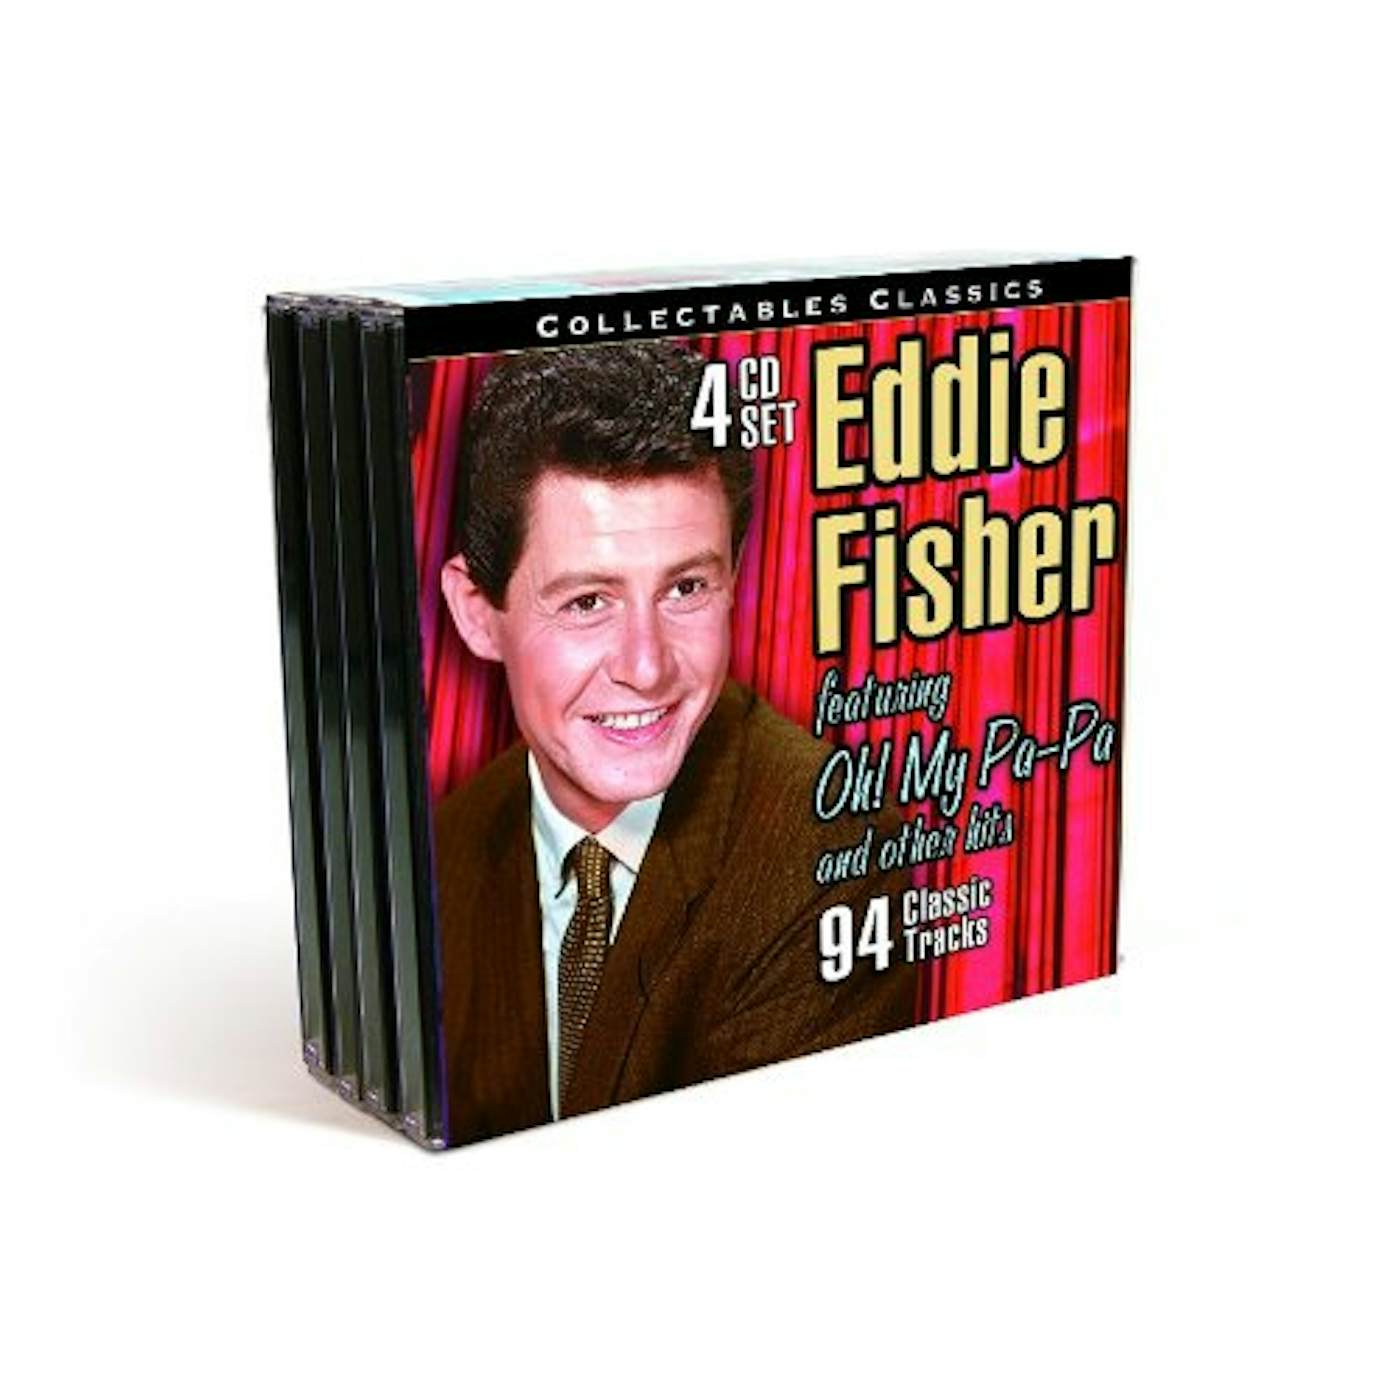 Eddie Fisher COLLECTABLES CLASSICS CD